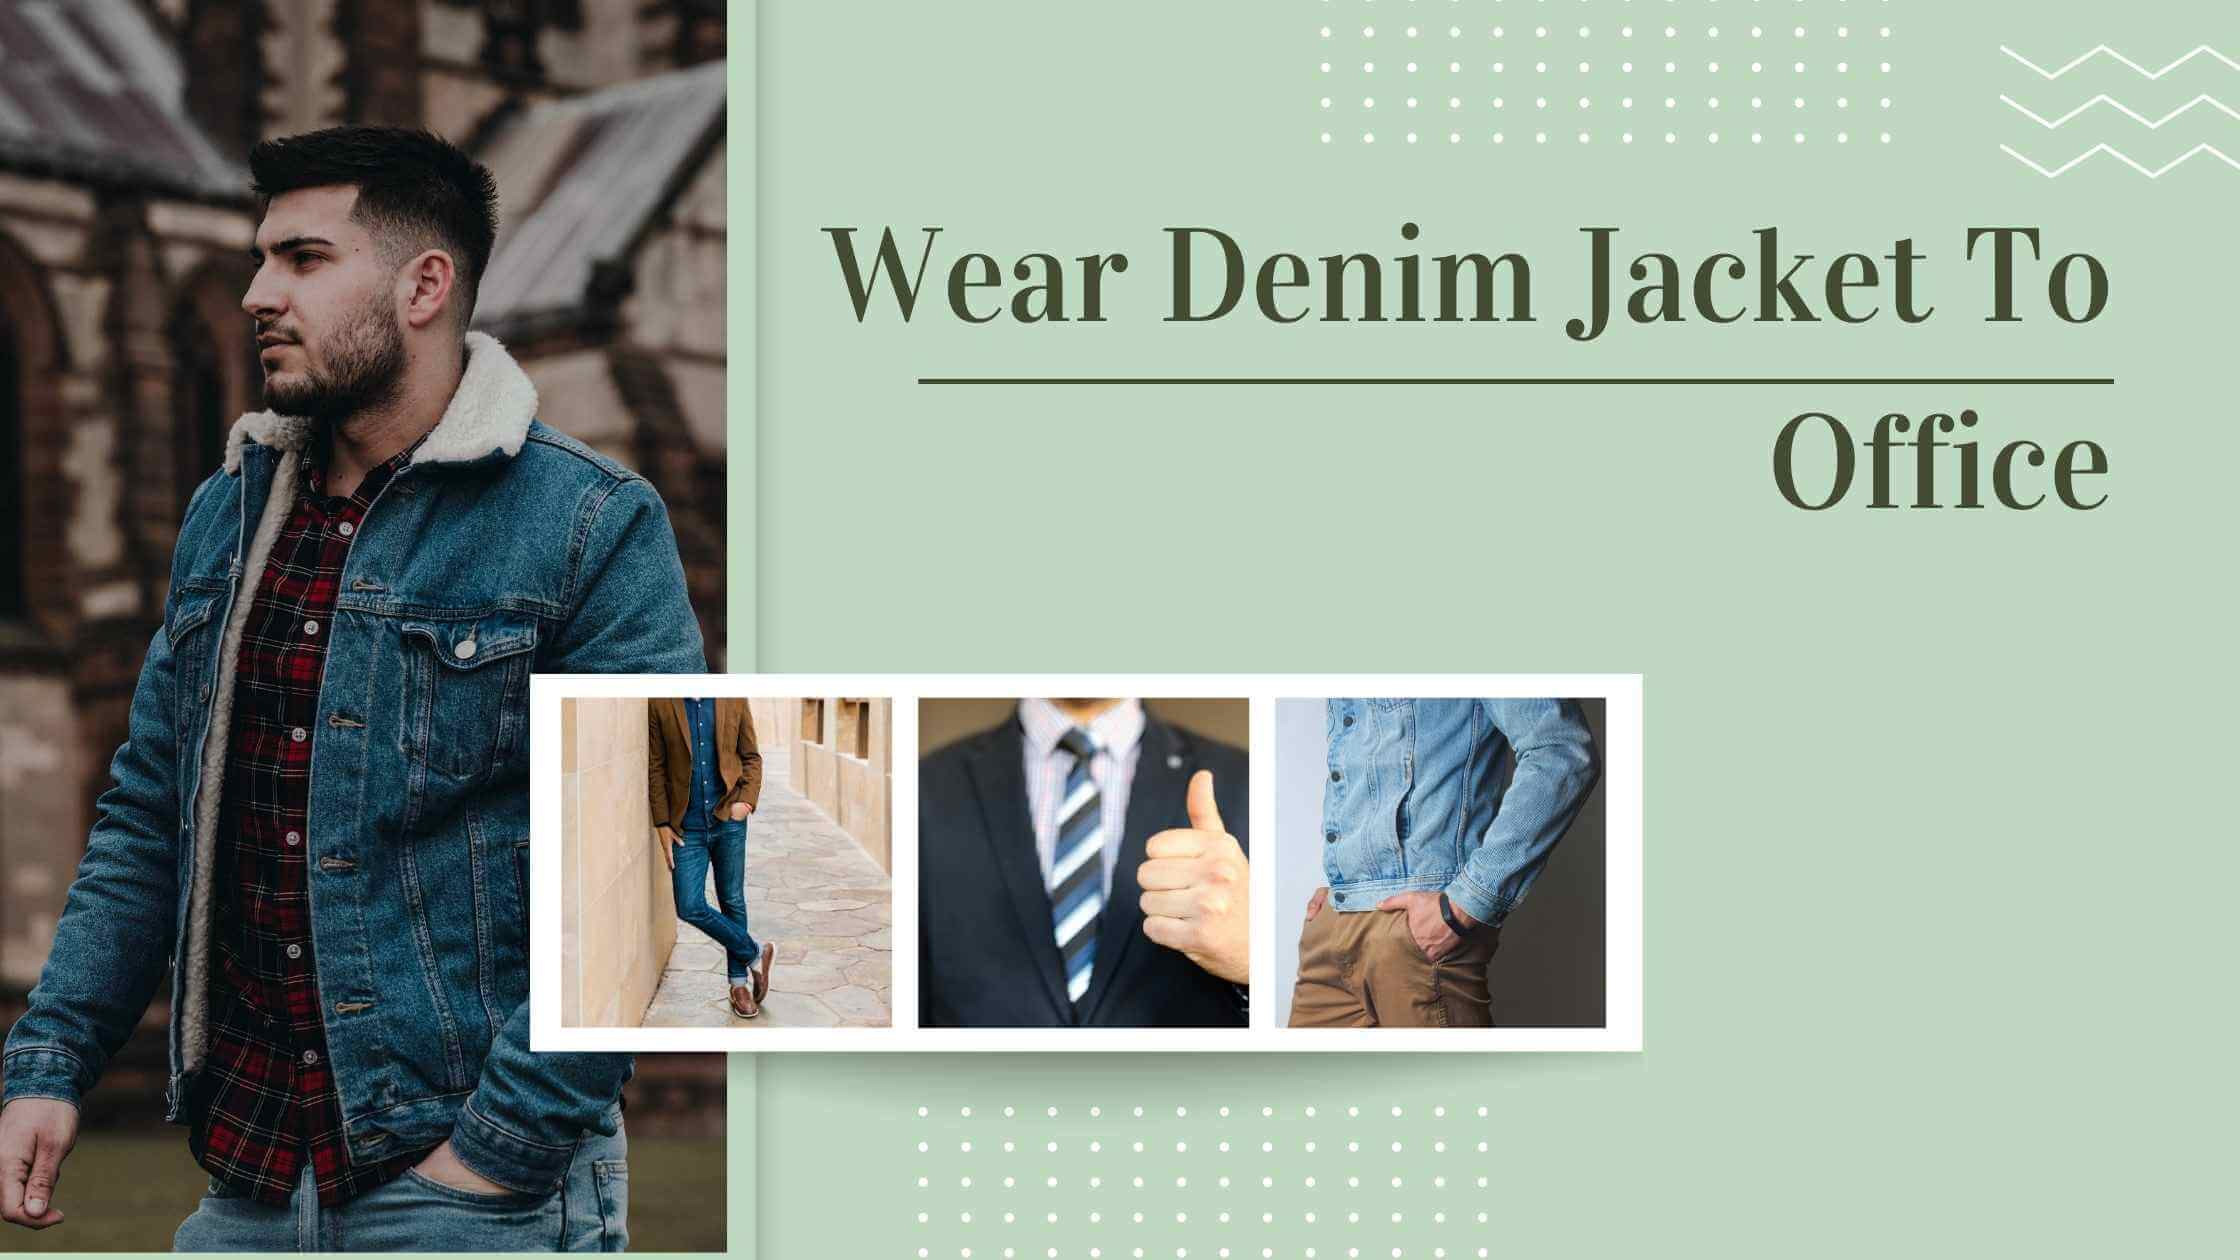 Denim jacket and jeans in official activity instead of formal is expressed in one image